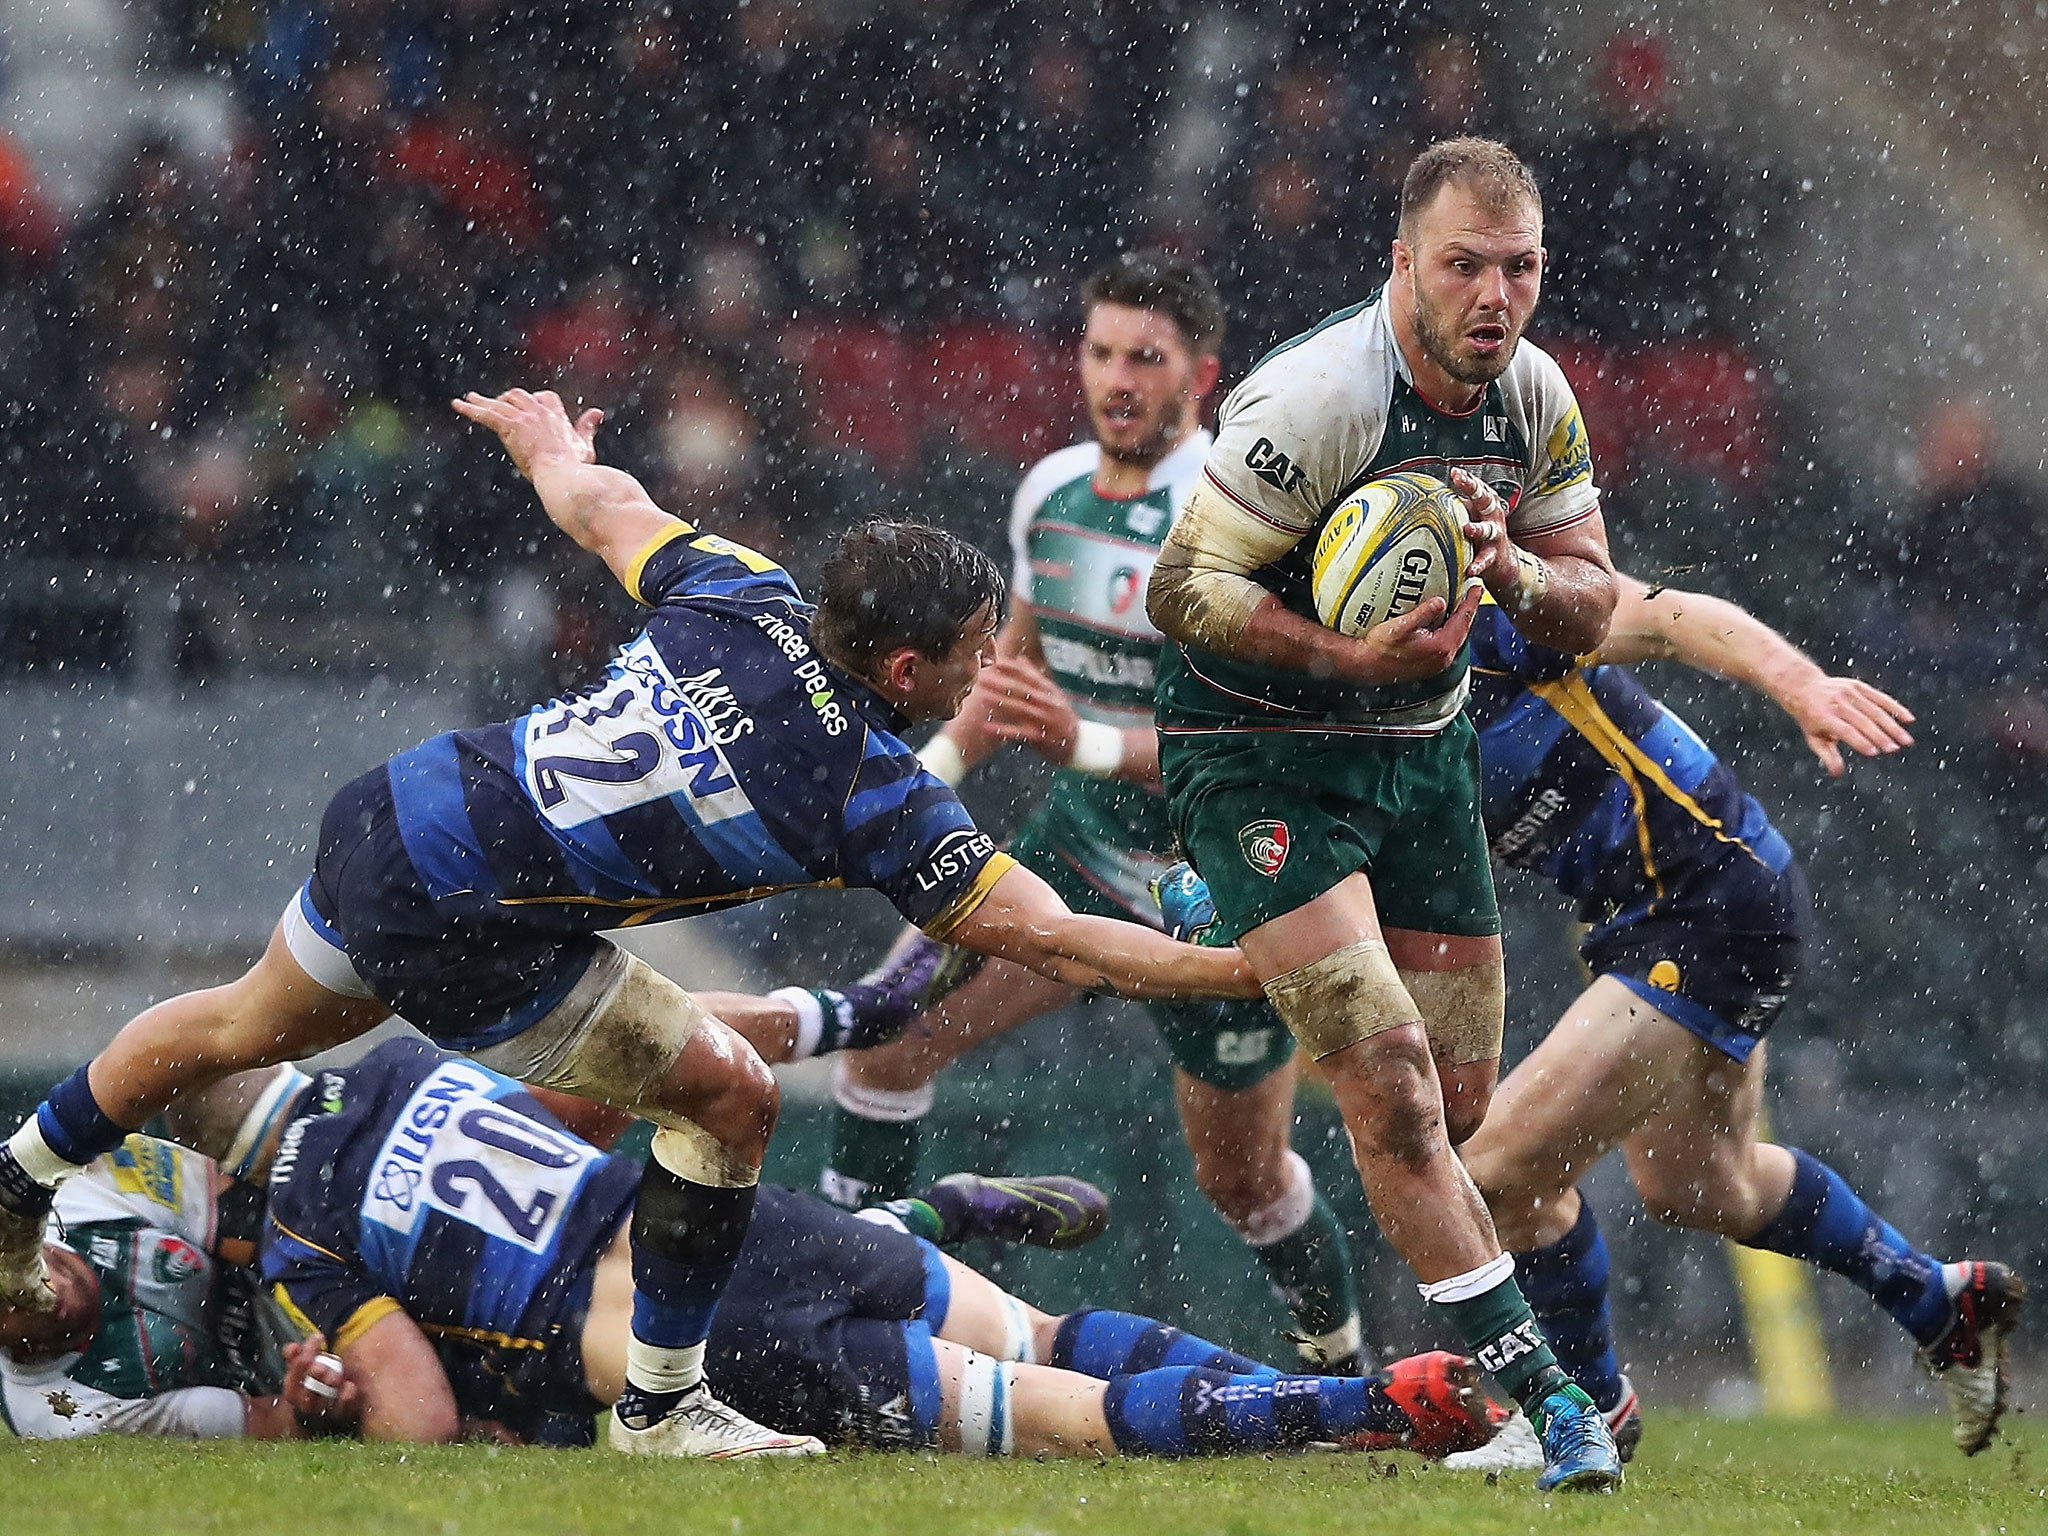 Lachlan McCaffrey of Leicester Tigers makes a break through the tackle of Ryan Mills of Worcester Warriors